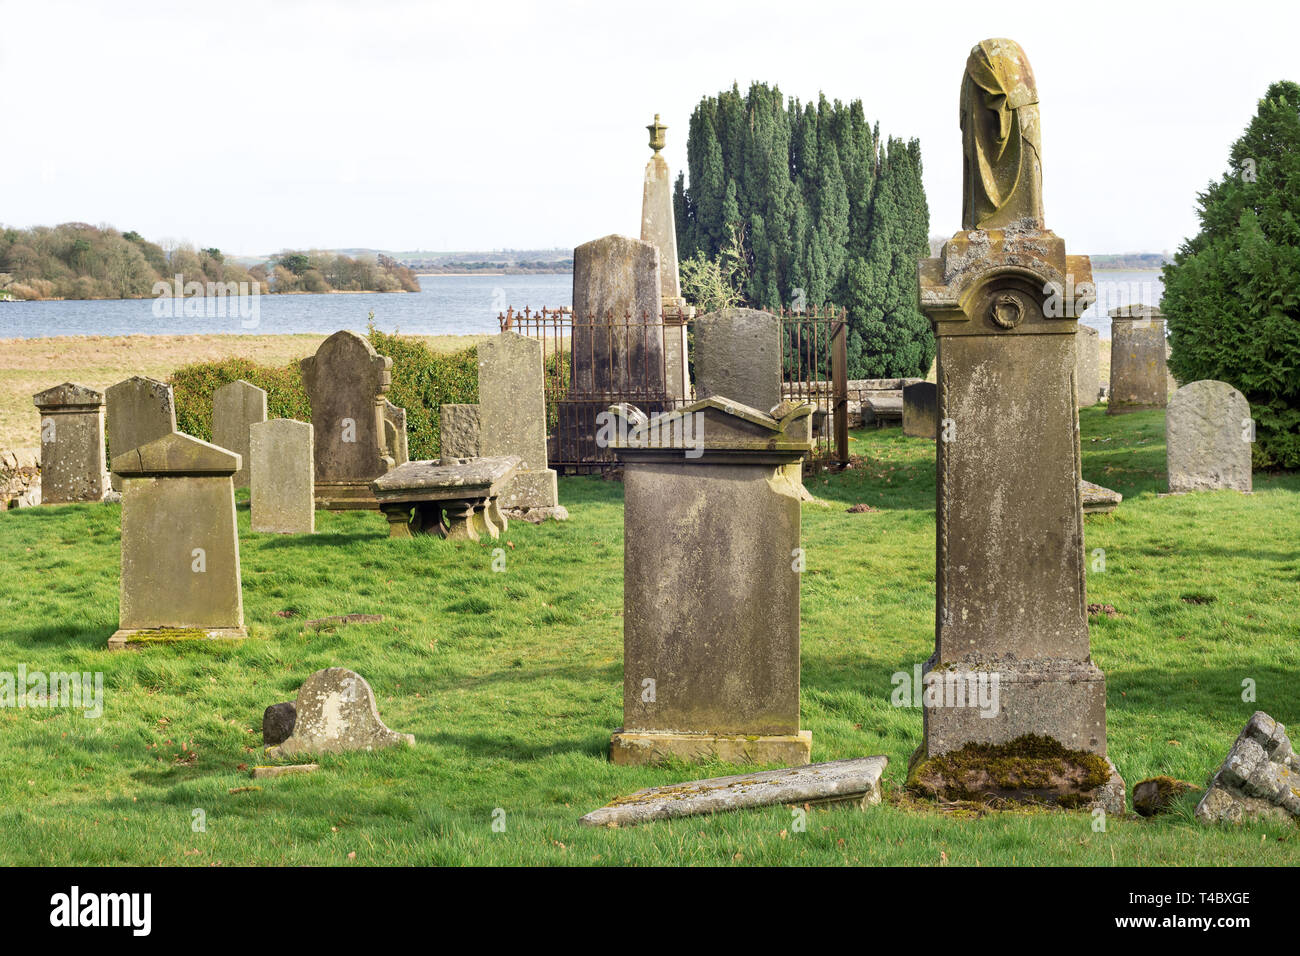 Old cemetery near the banks of Loch Leven in Scotland, UK. Loch Leven in the background Stock Photo